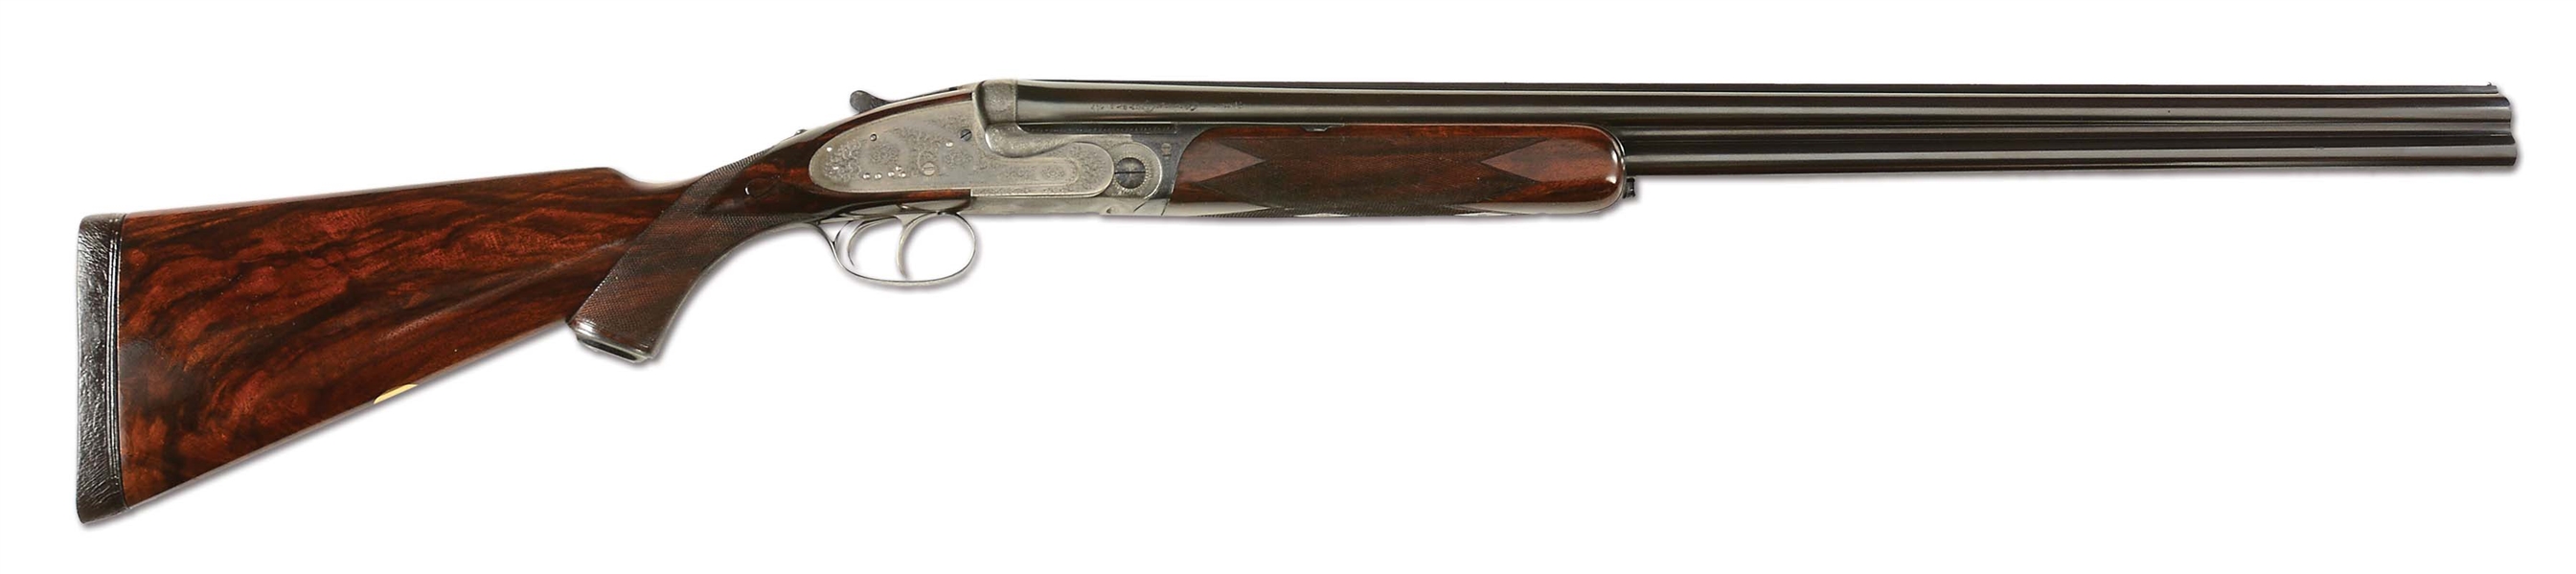 (C) INTERESTING PURDEY "SEXTUPLET" OVER/UNDER SHOTGUN WITH LATE IMPROVEMENTS BUT STILL EMPLOYING ALL SIX BOLTS WITH CASE AND SOME ACCESSORIES.